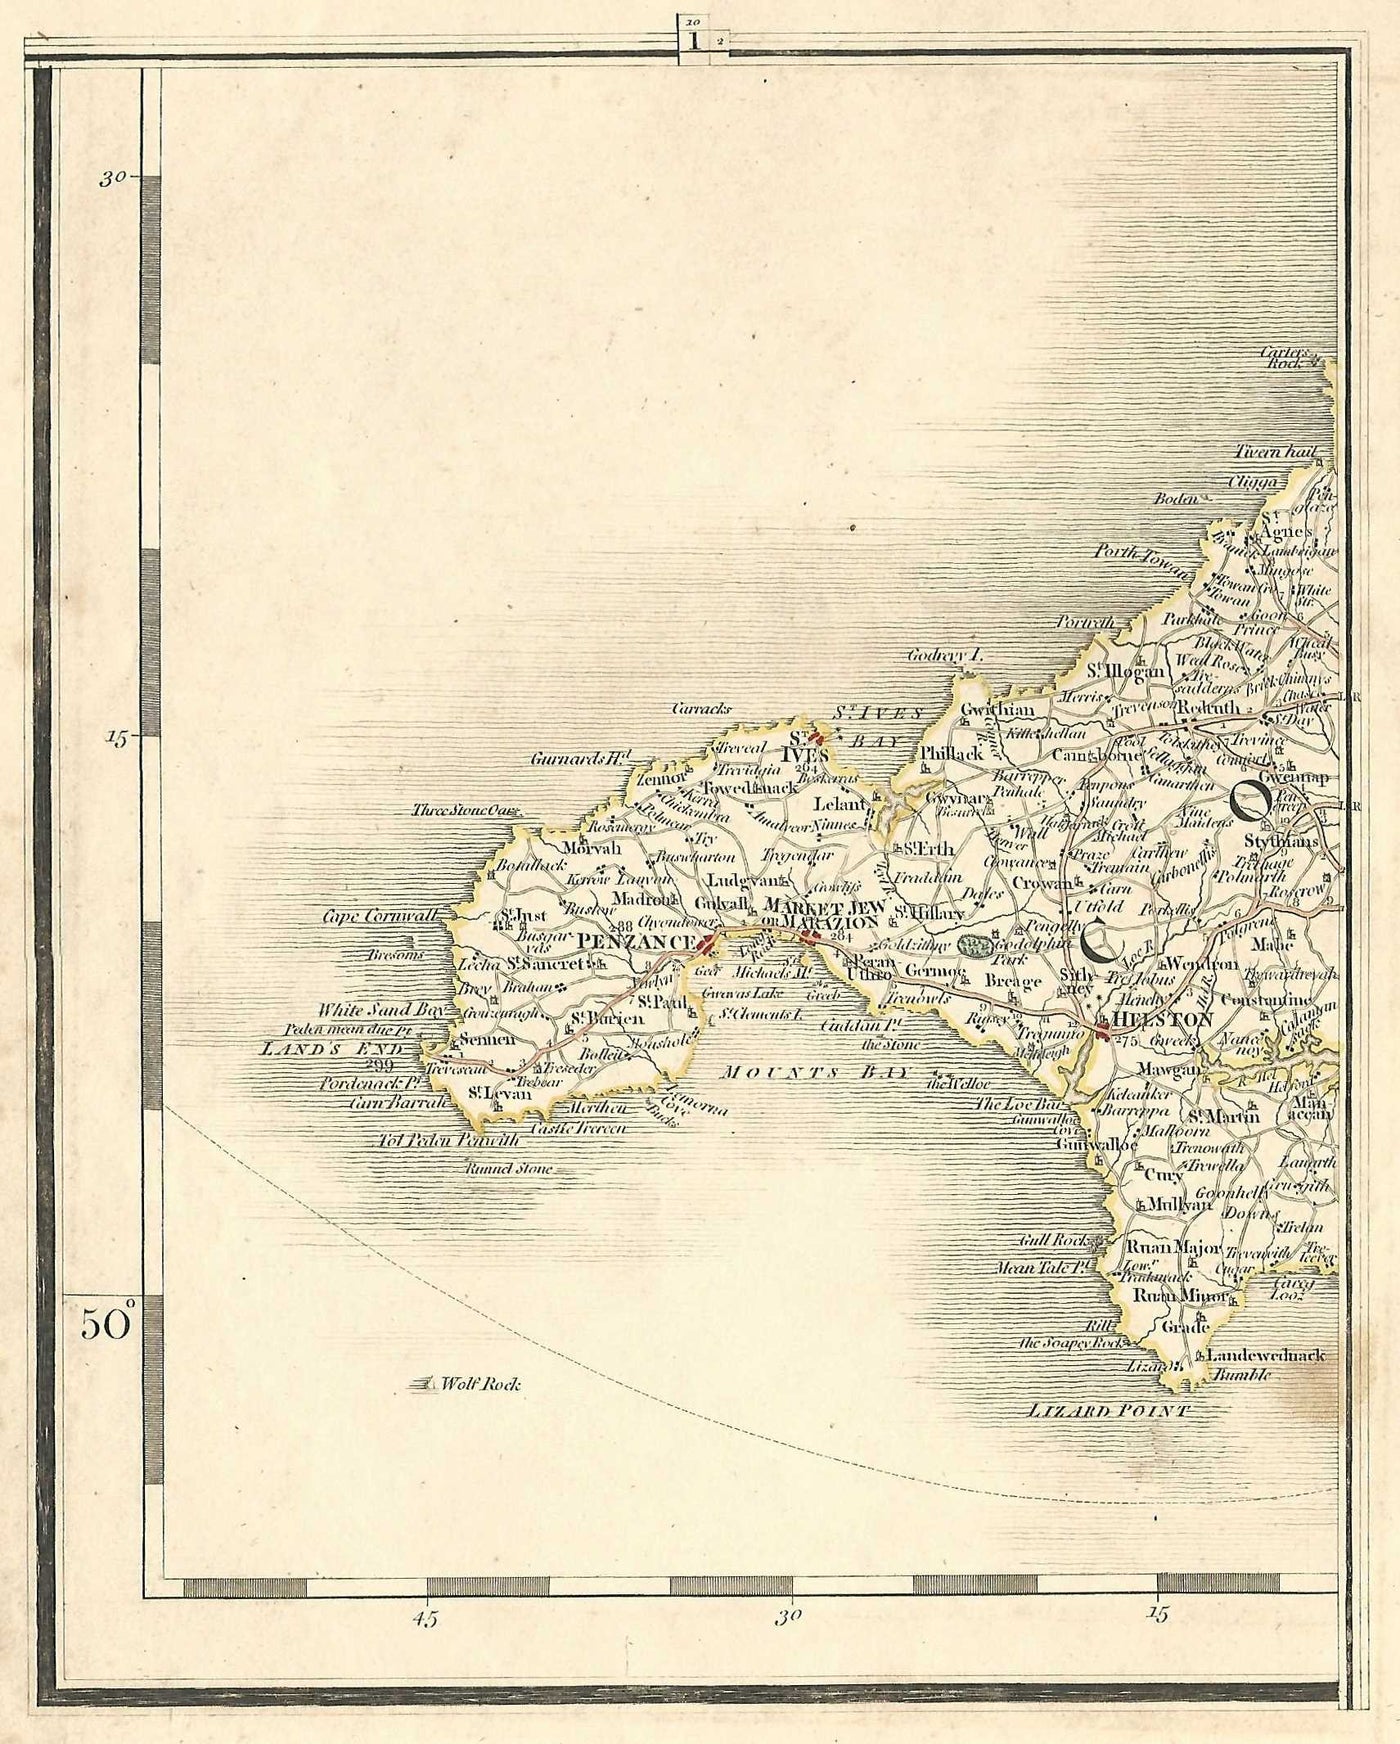 Cornwall antique map Lands End, Penzance, Marazion, Helston, St.Ives, Redruth